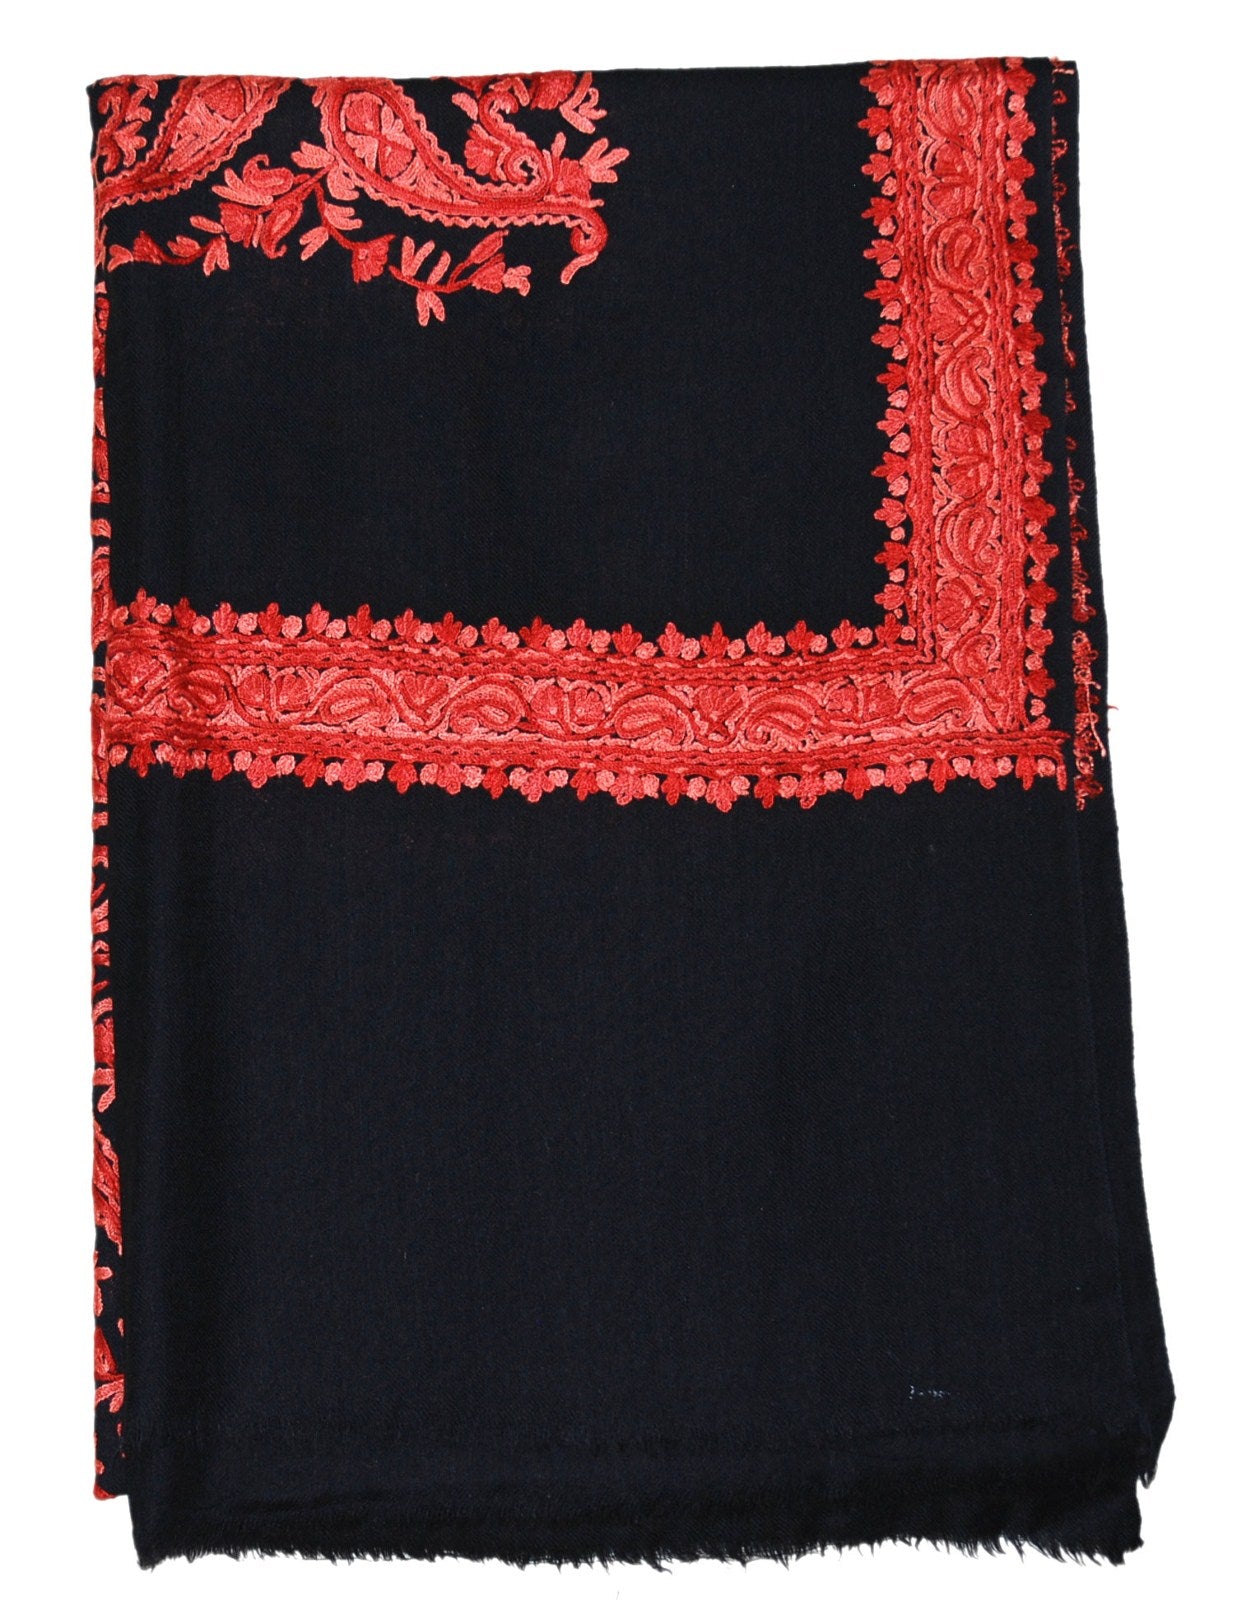 Hand Embroidered Woolen Shawl Scarf Black, Coral Embroidery #WS-144